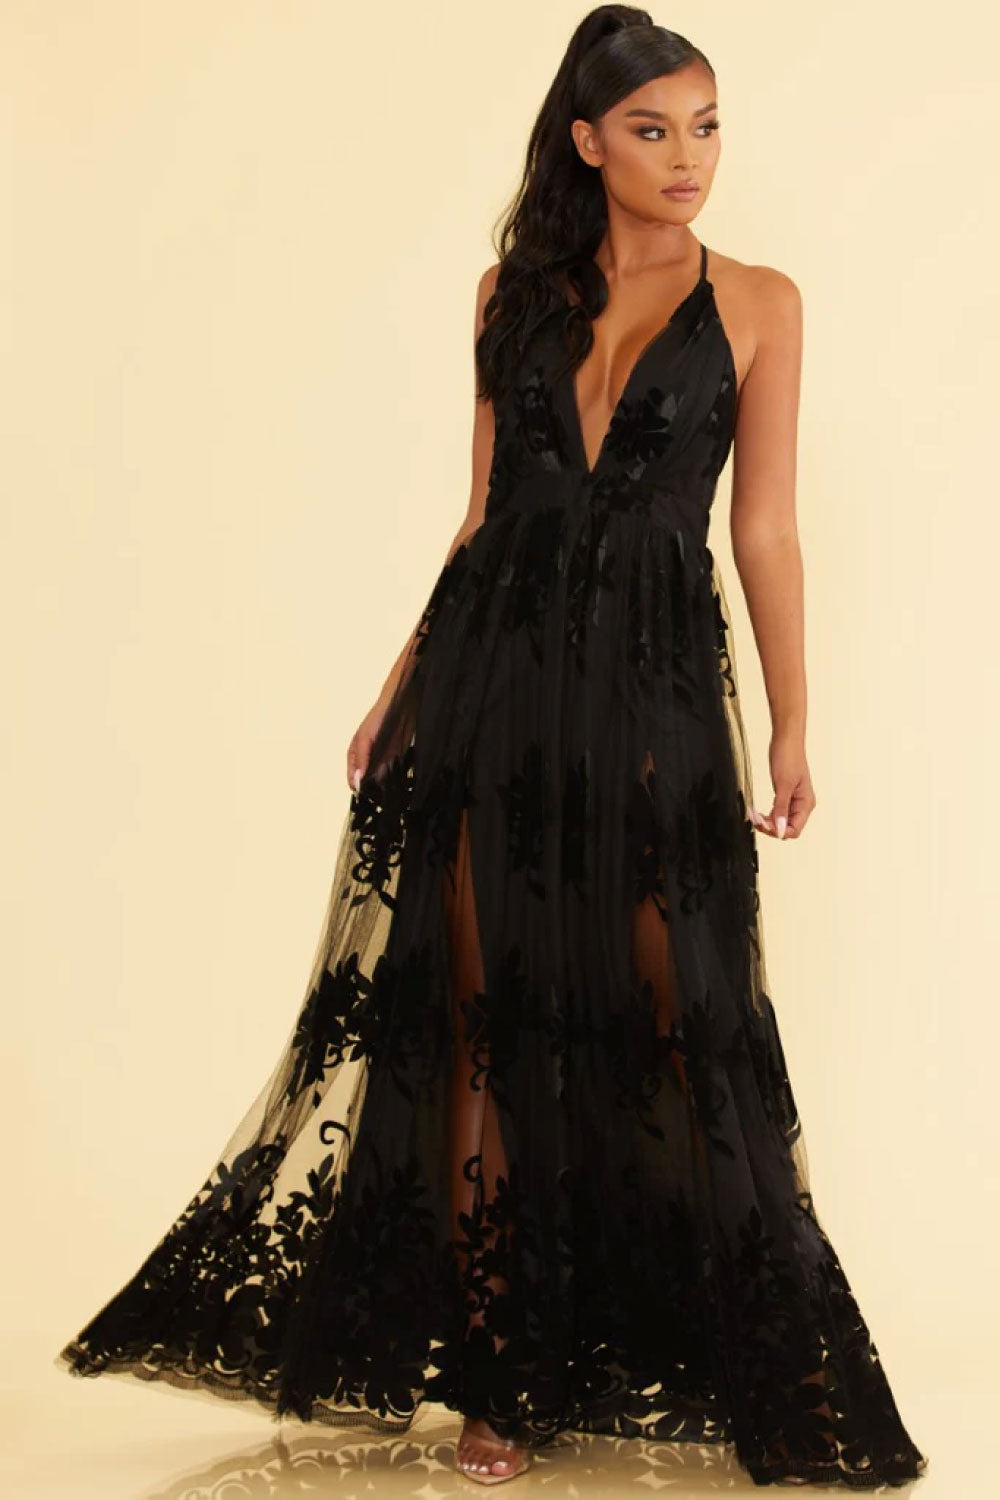 Image of the front of Luxxel's Elegant Lace Gown in Black on a model.